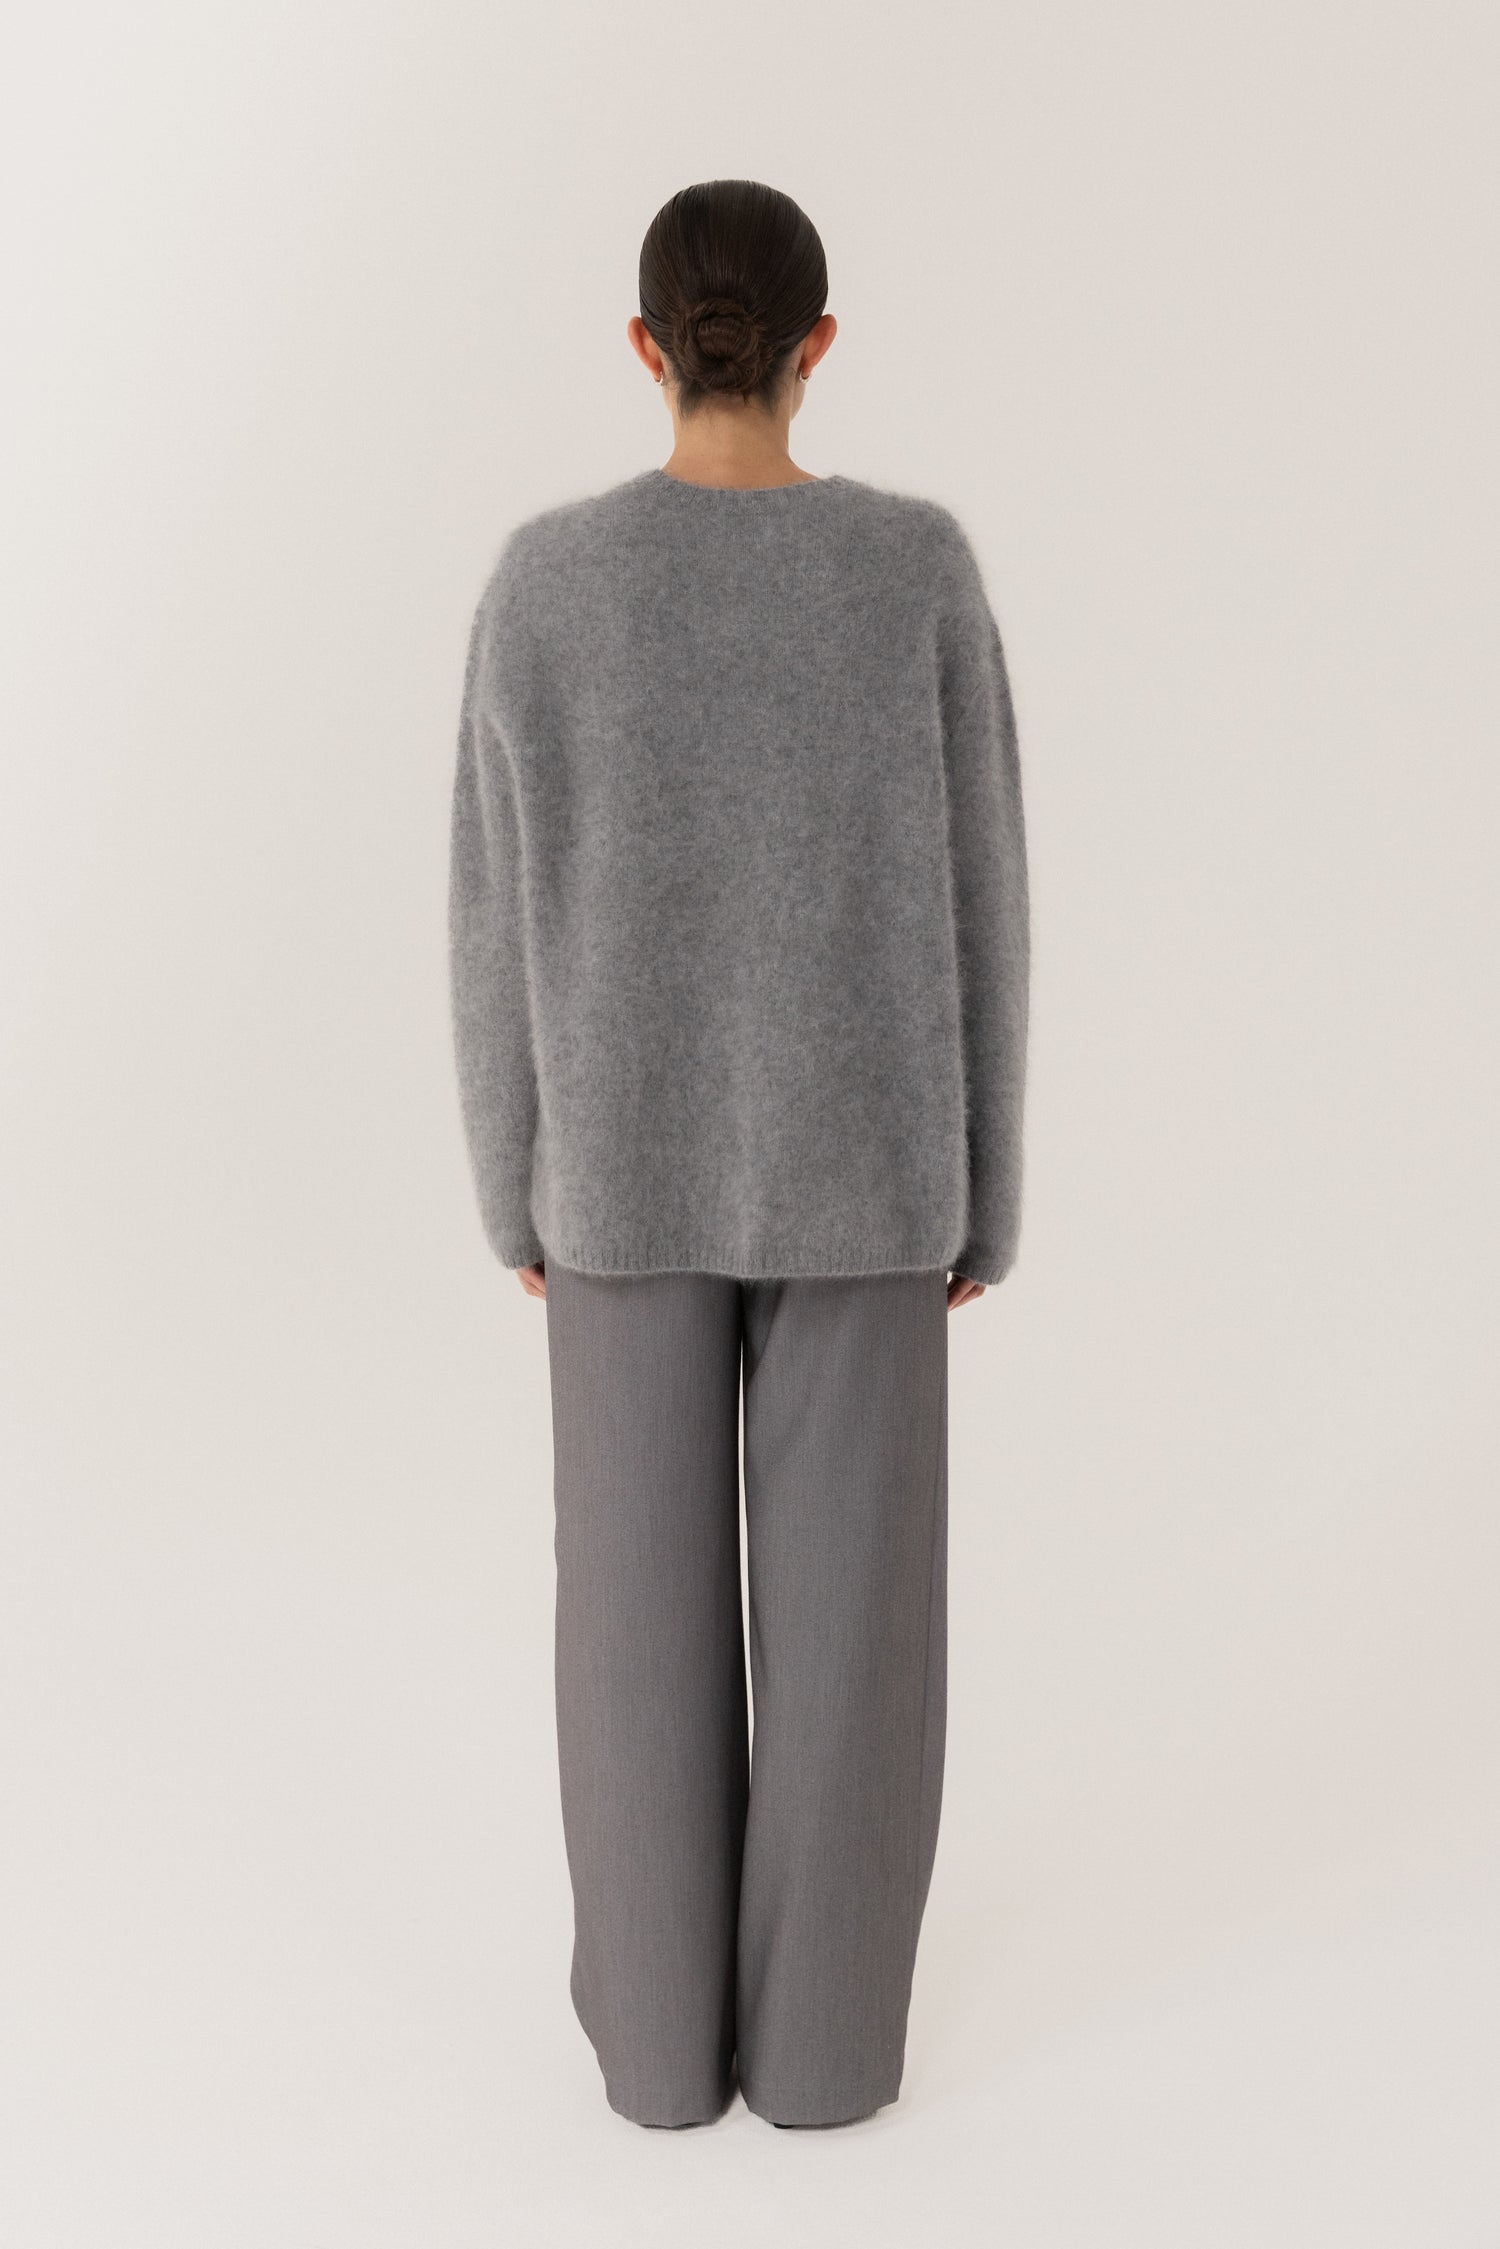 Floy Cashmere Sweater, grey